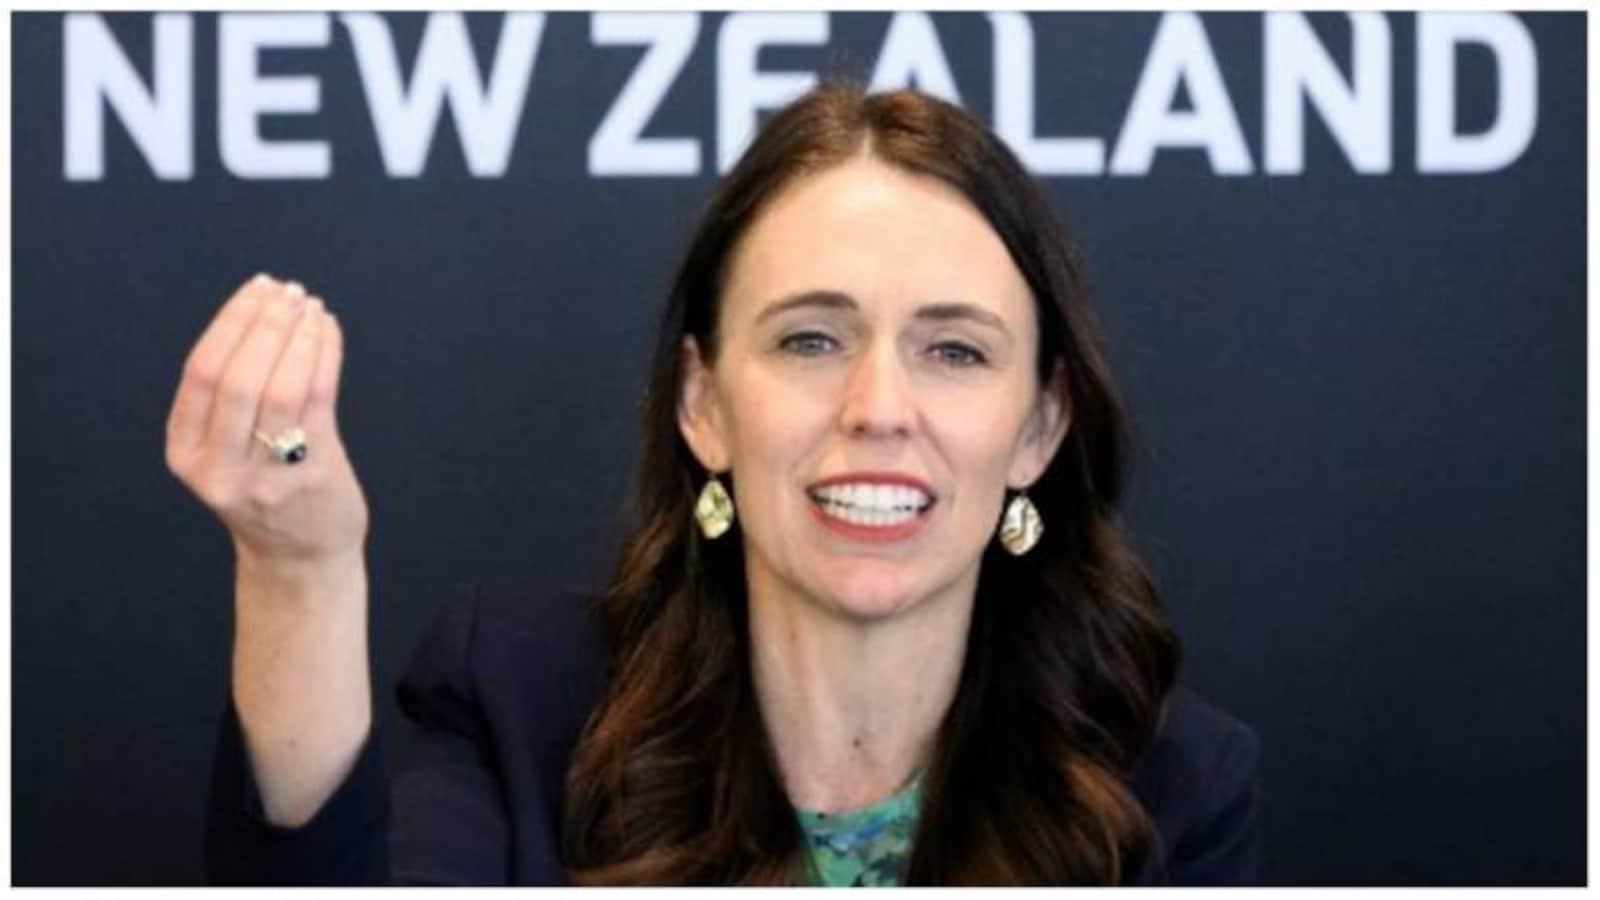 New Zealand Prime Minister Jacinda Ardern says she will step down next month